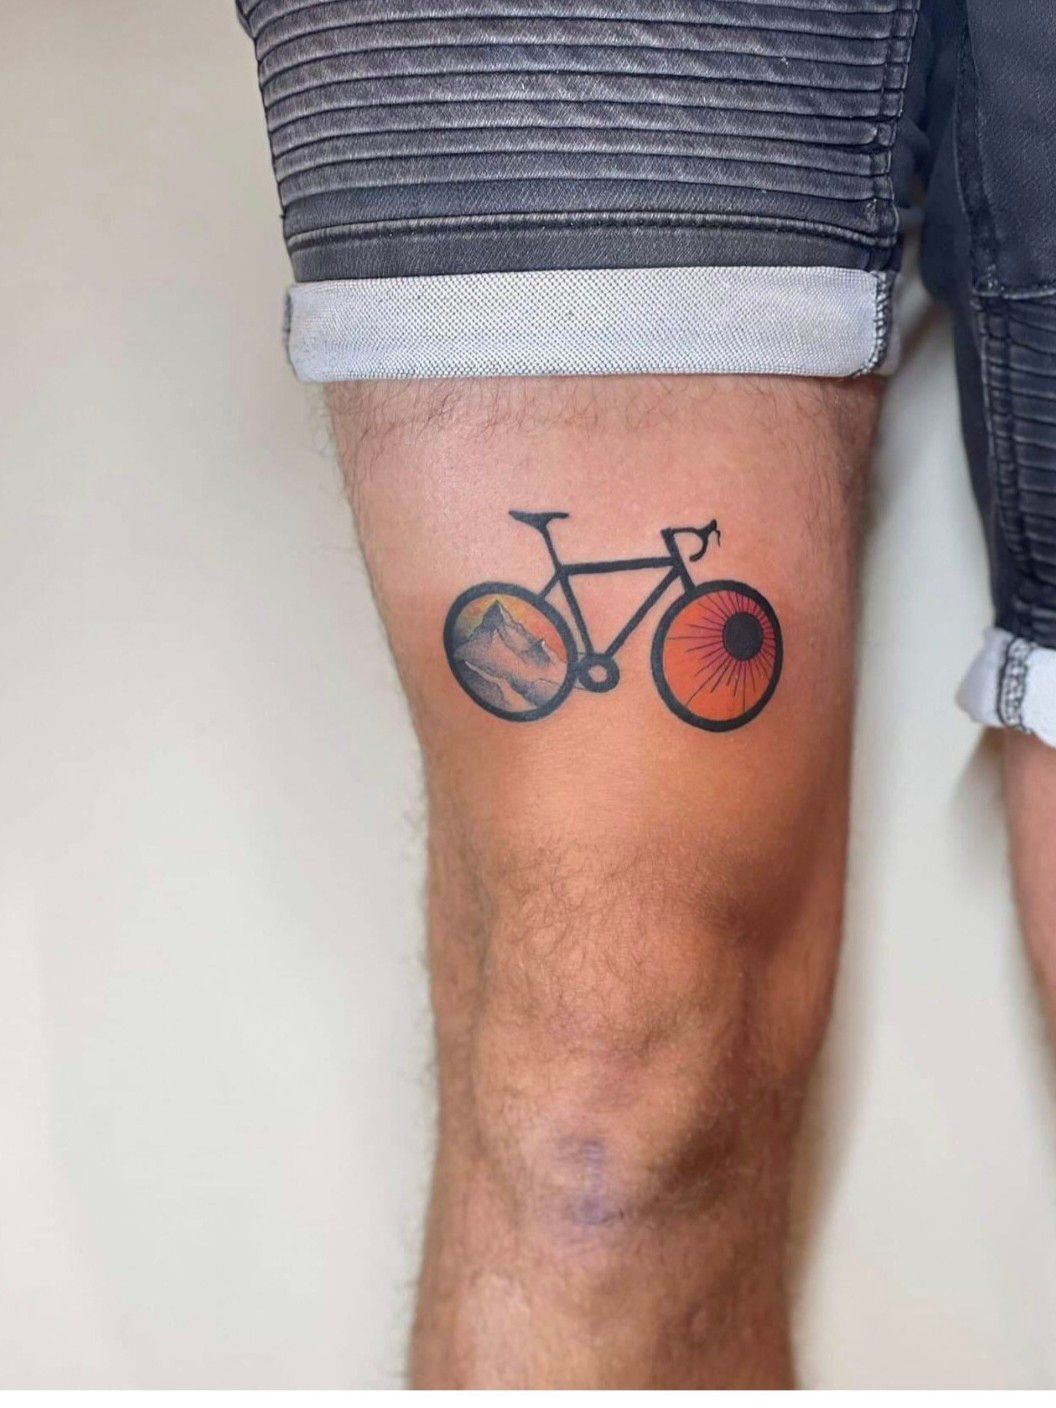 Cycling Tattoos 2 - YouTube